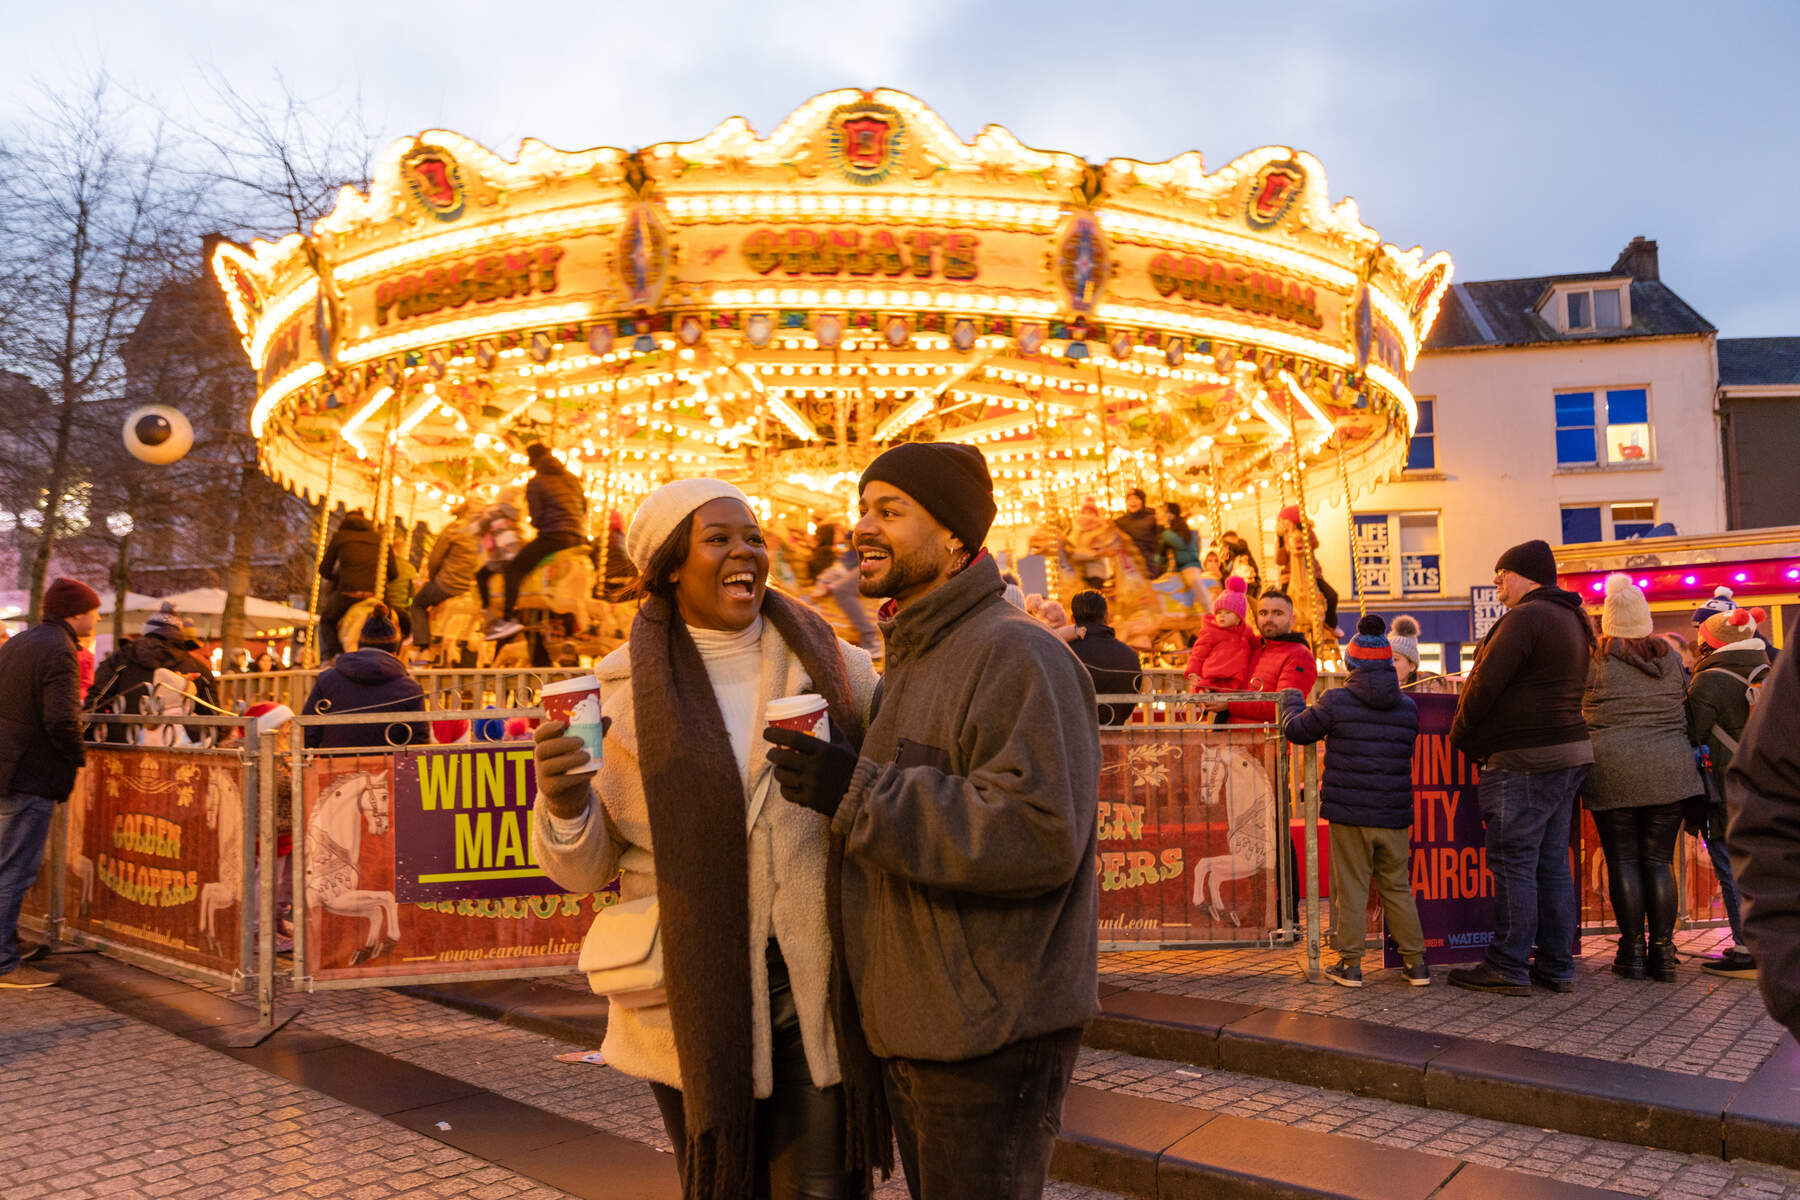 A couple in front of a festive merry-go-round